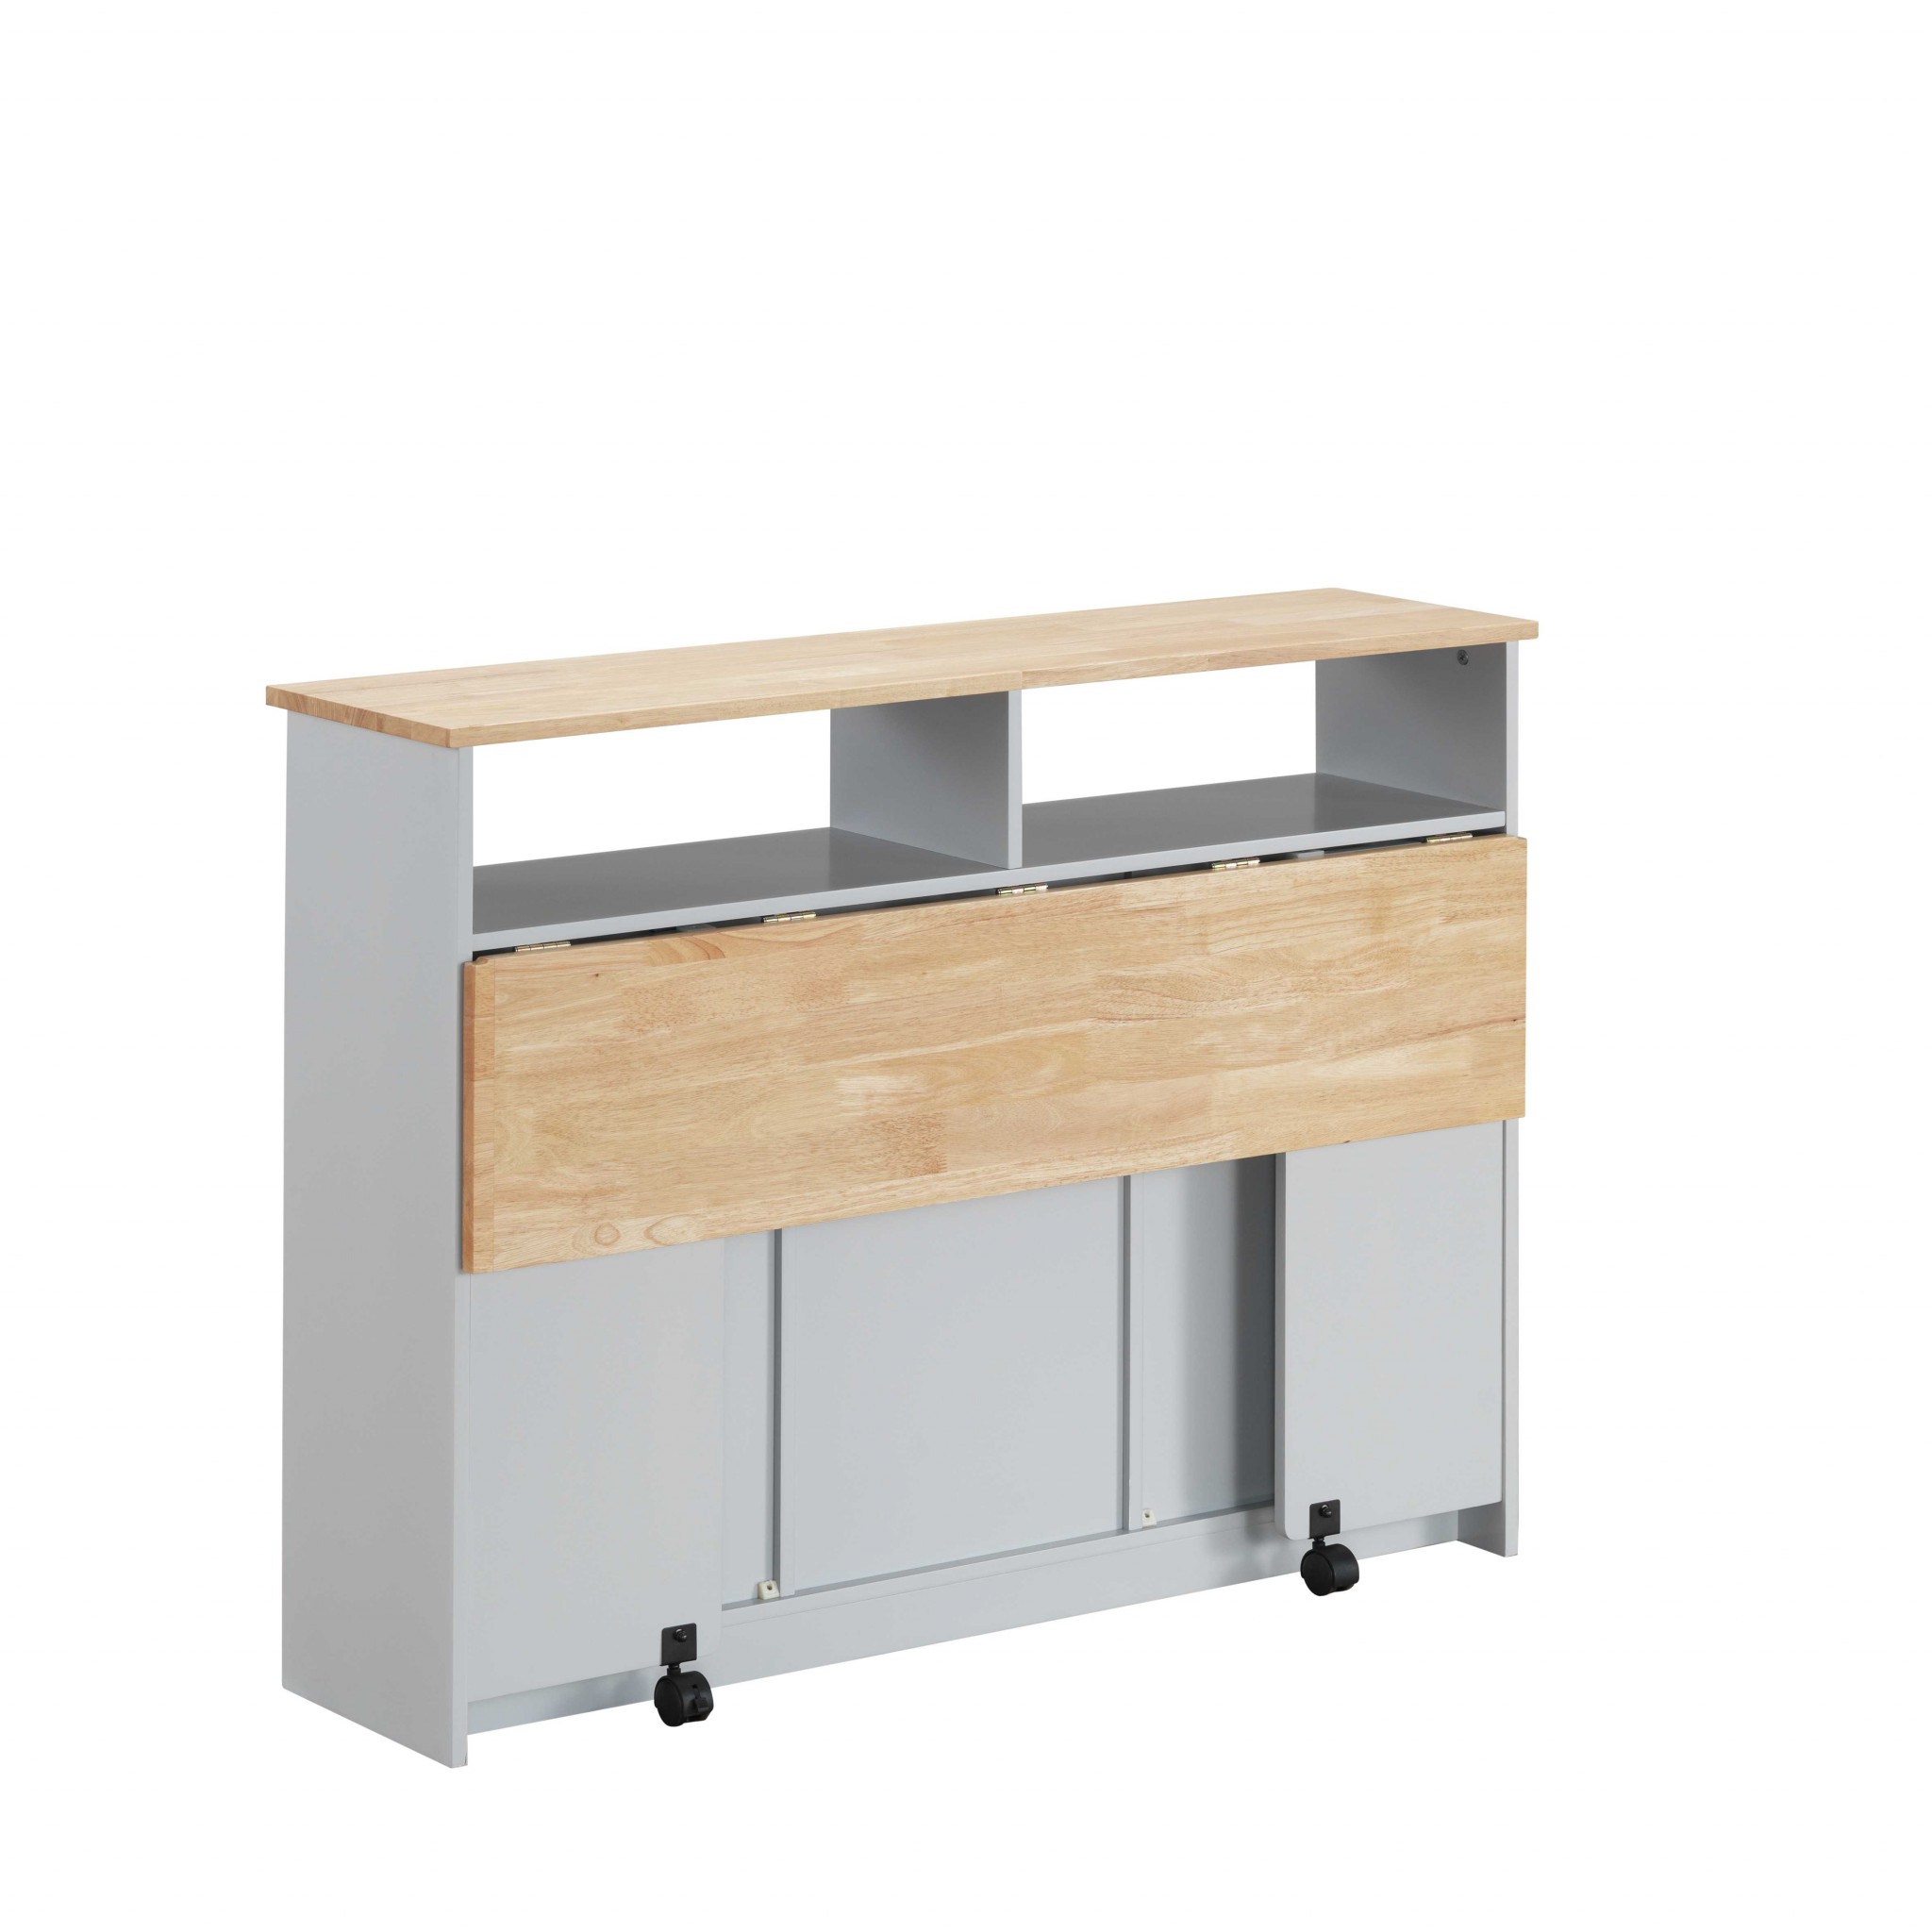 23" X 47" X 37" Natural Gray Wood Casters Kitchen Cart